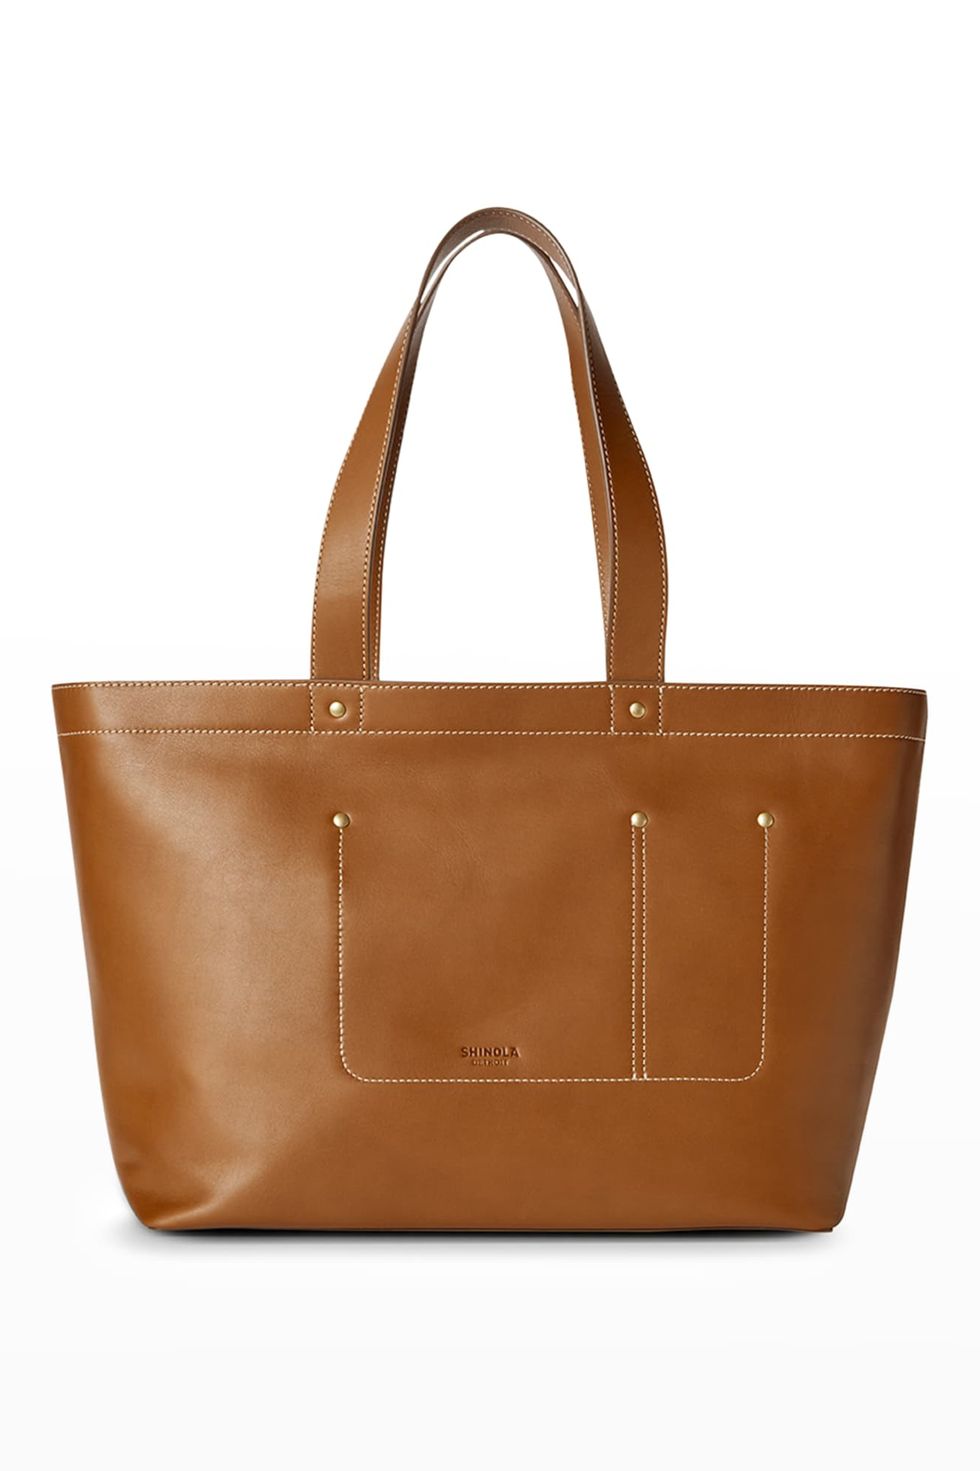 The Pocket Leather East-West Tote Bag